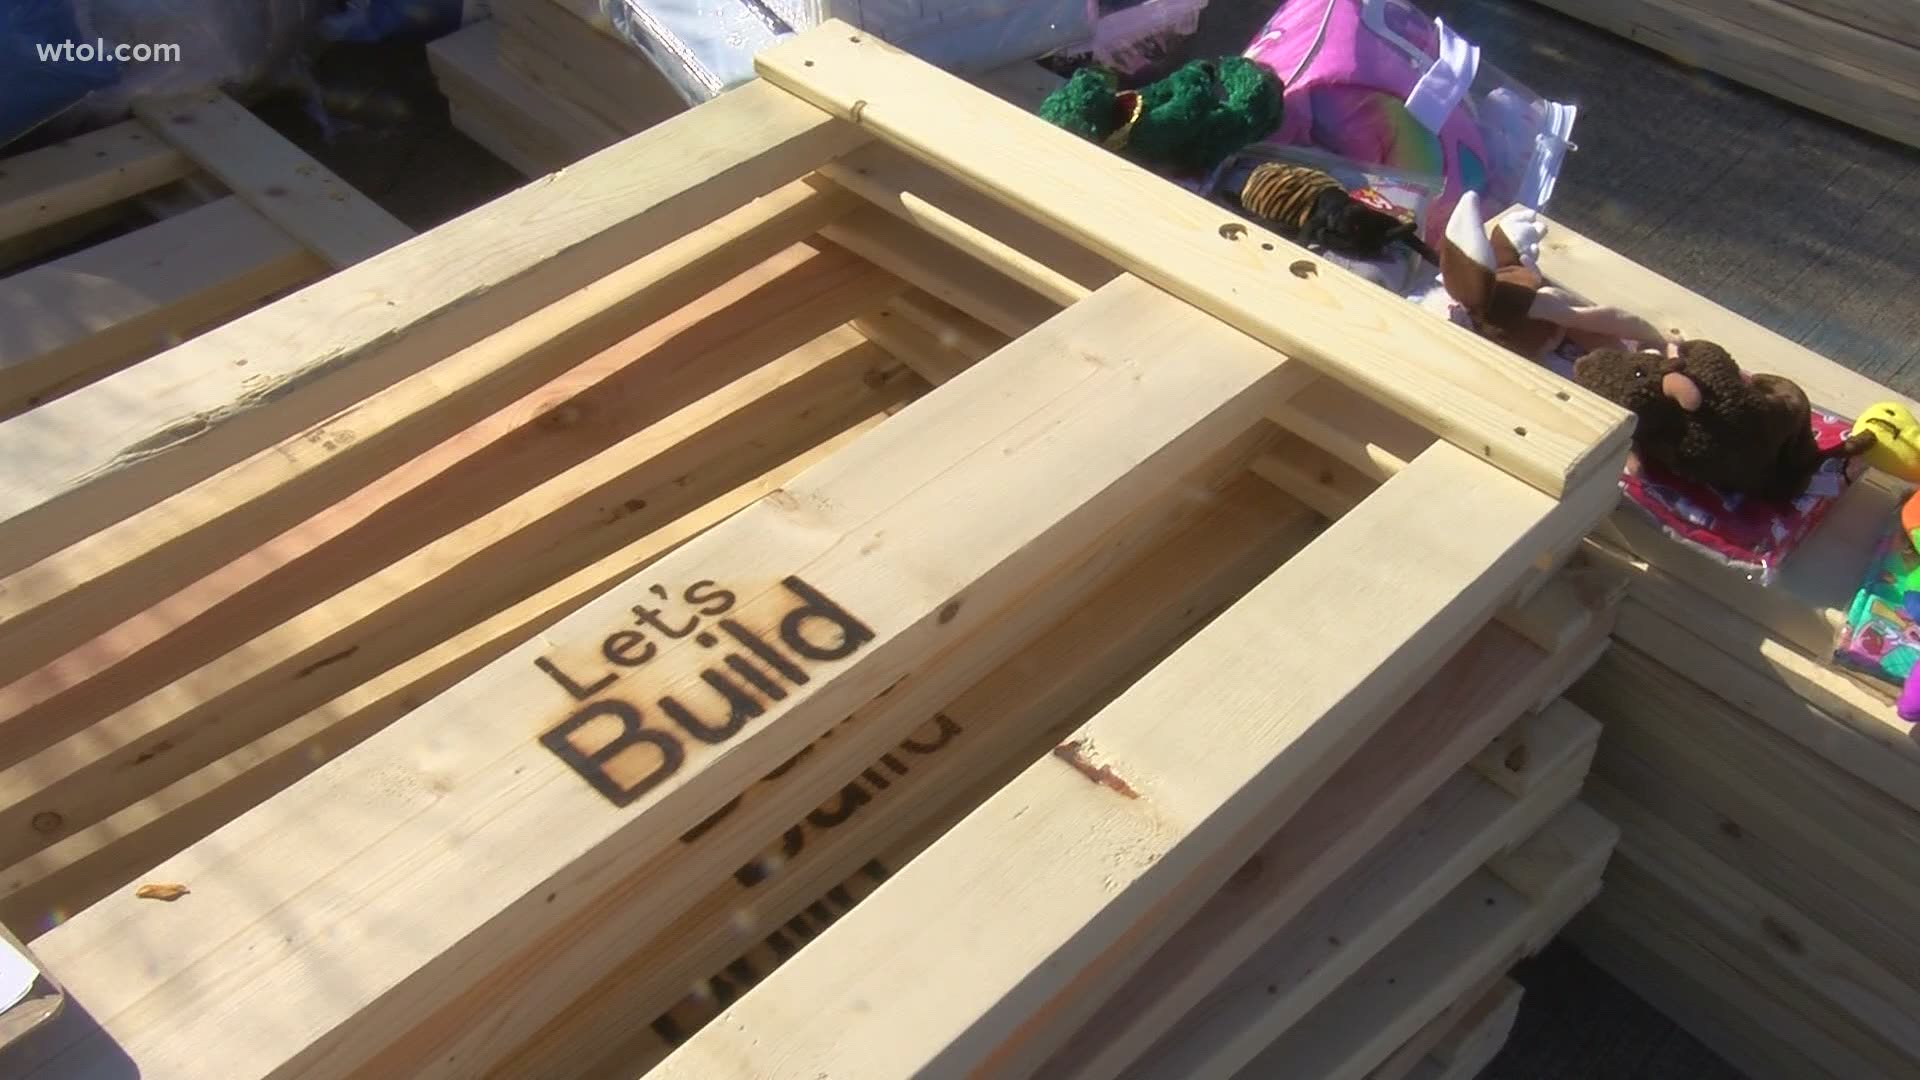 Let's build is a nonprofit organization that provides beds for children in need between the ages 3 to 17